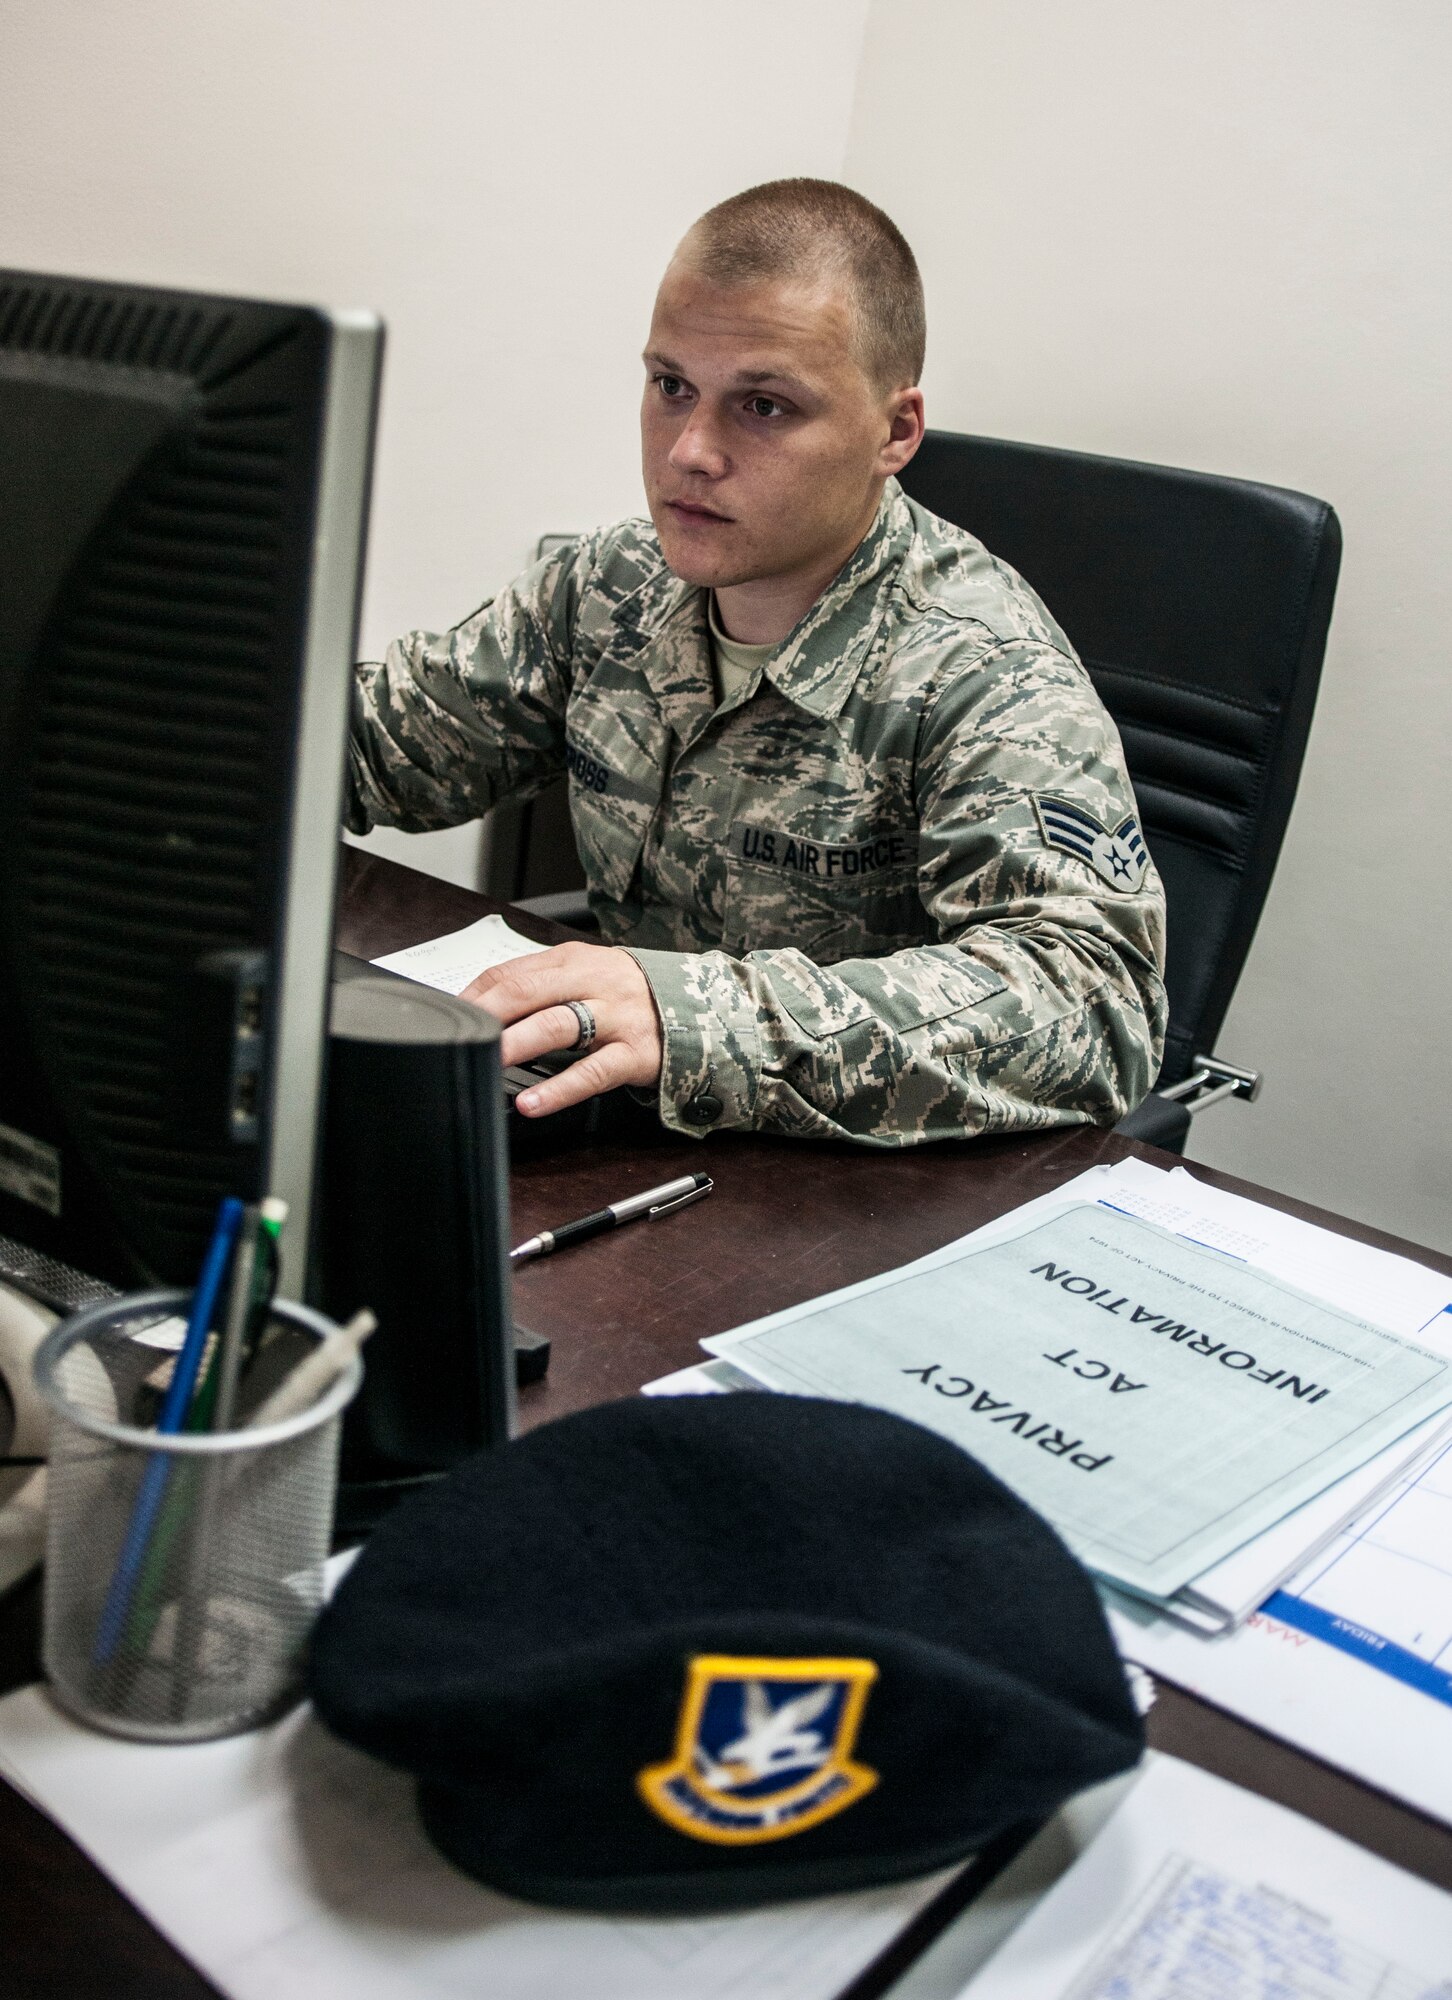 Senior Airman Devon Cross, 39th Comptroller Squadron security forces squadron financial specialist, reviews financial plans in the 39th SFS headquarters building June 4, 2013, at Incirlik Air Base, Turkey. Cross is the only finance personnel here embedded within another unit as part of a trial program known as "All Things Finance."